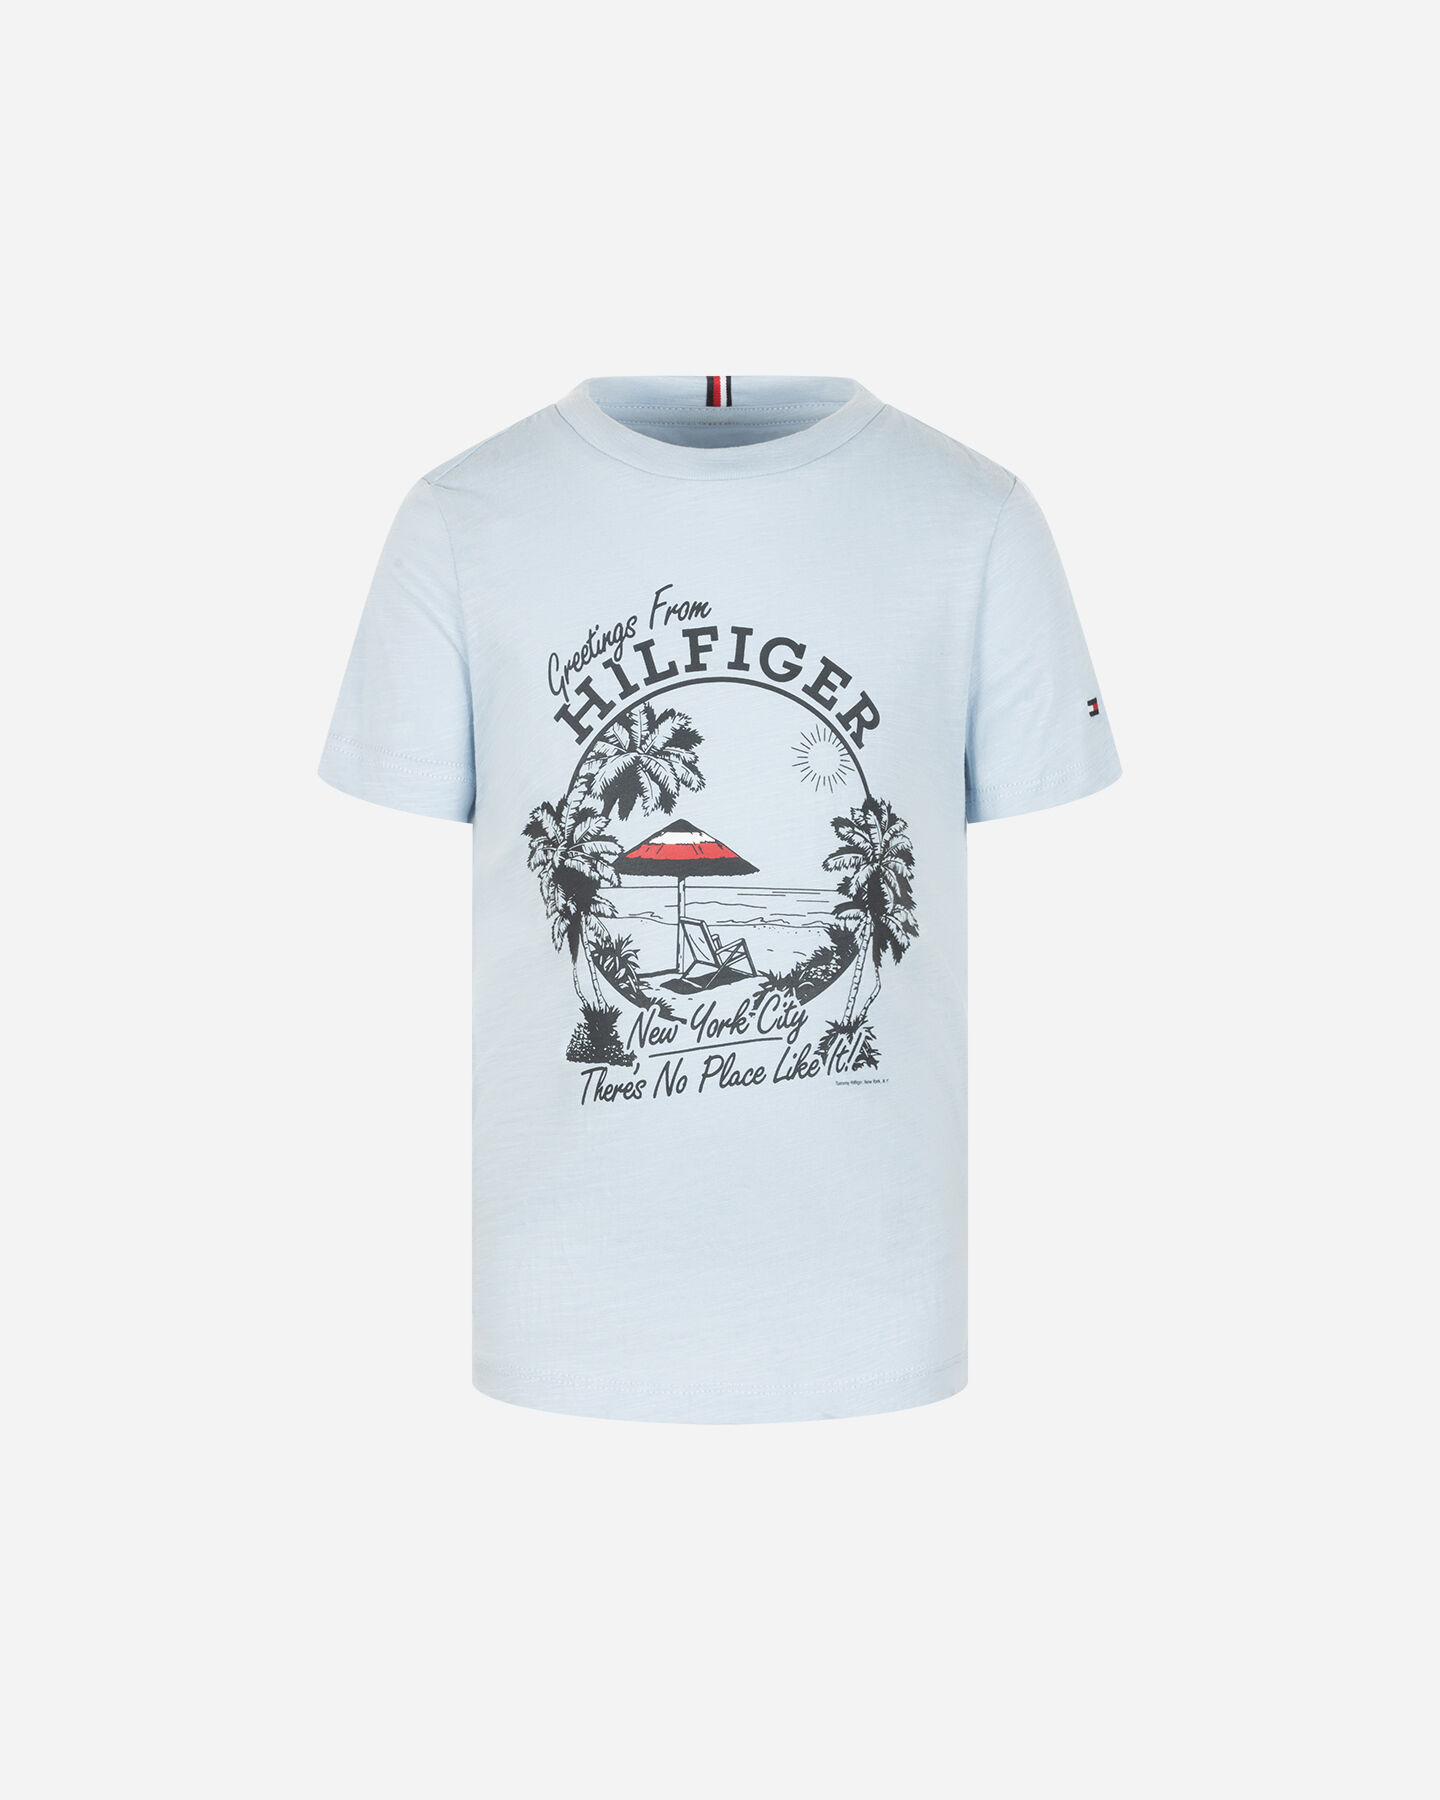  T-Shirt TOMMY HILFIGER GREETINGS FROM JR S4131537|Breezy Blu|8 scatto 0